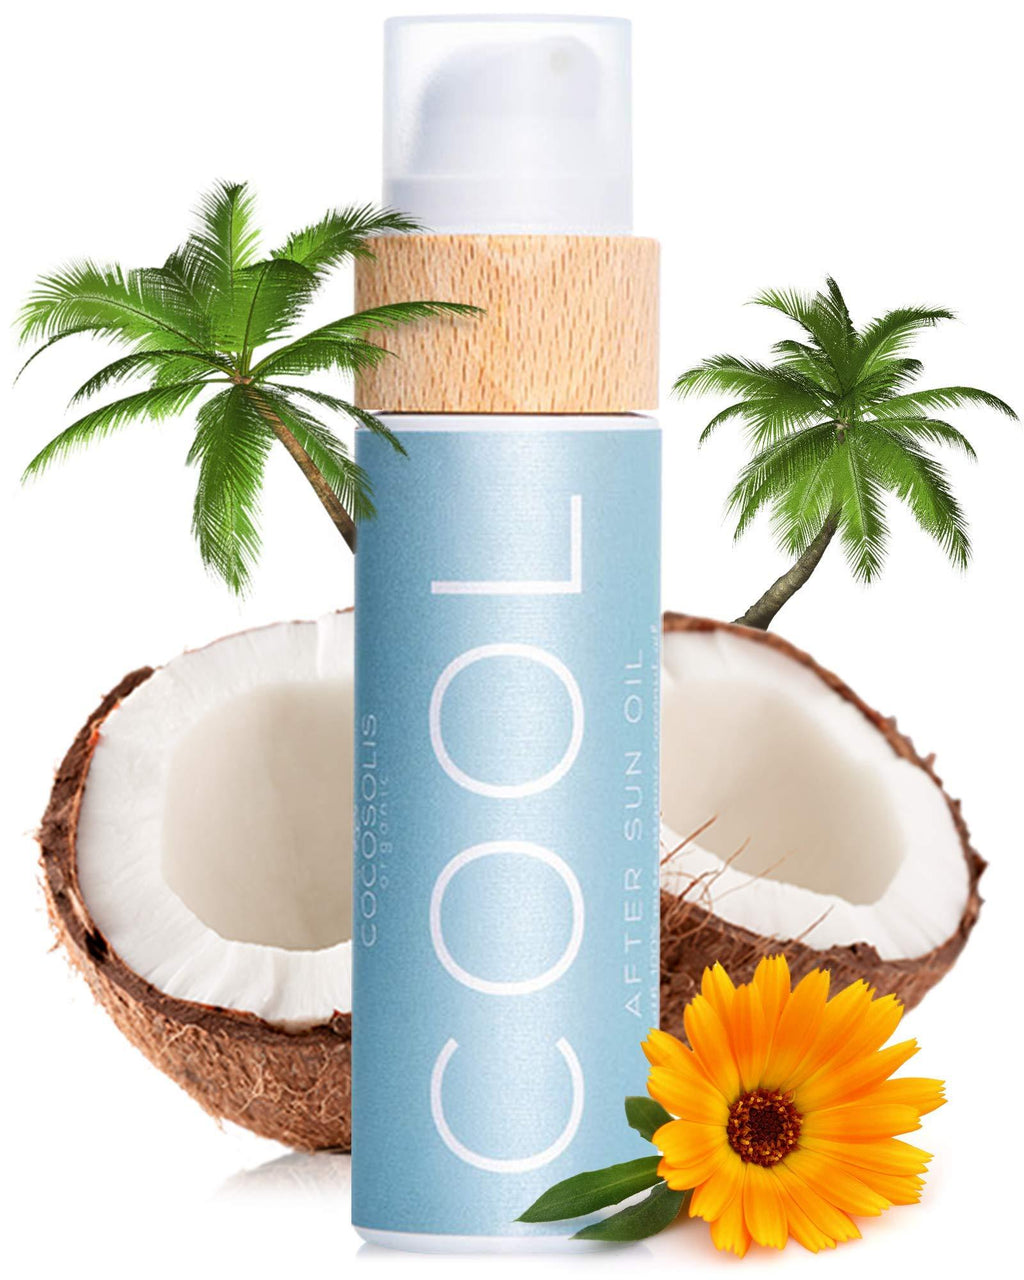 [Australia] - COCOSOLIS COOL After Sun Oil | Organic Oil for Tender Hydration and Recovery After Sun | Moisturising, Revitalising & Nourishing the Skin | 9 Raw Organic Oils for Smooth & Elastic Skin 